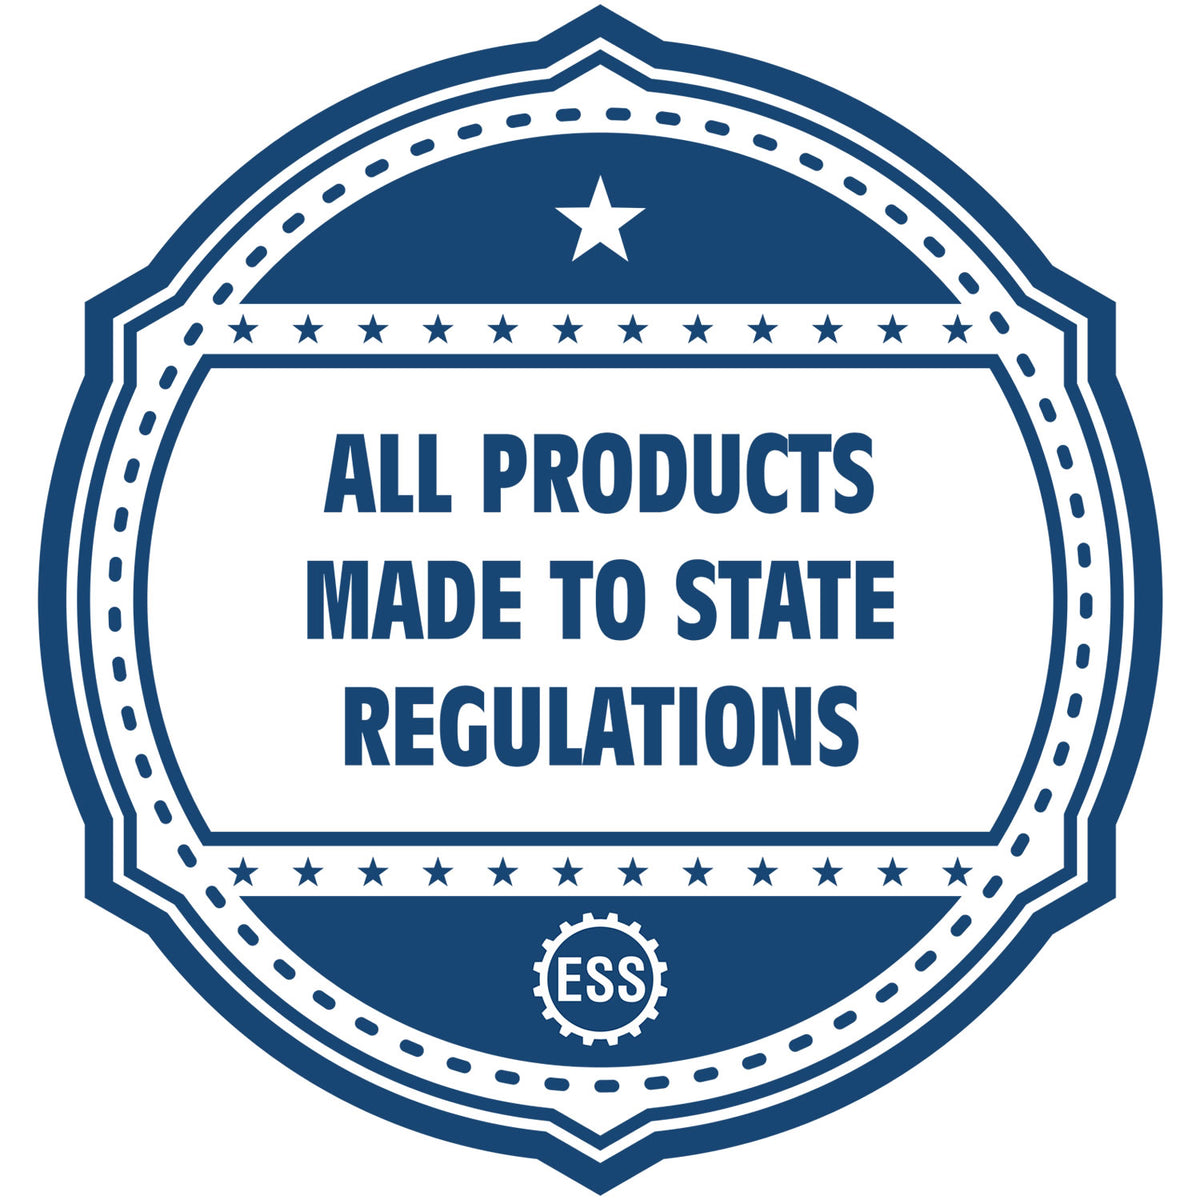 An icon or badge element for the Slim Pre-Inked Rectangular Notary Stamp for Guam showing that this product is made in compliance with state regulations.